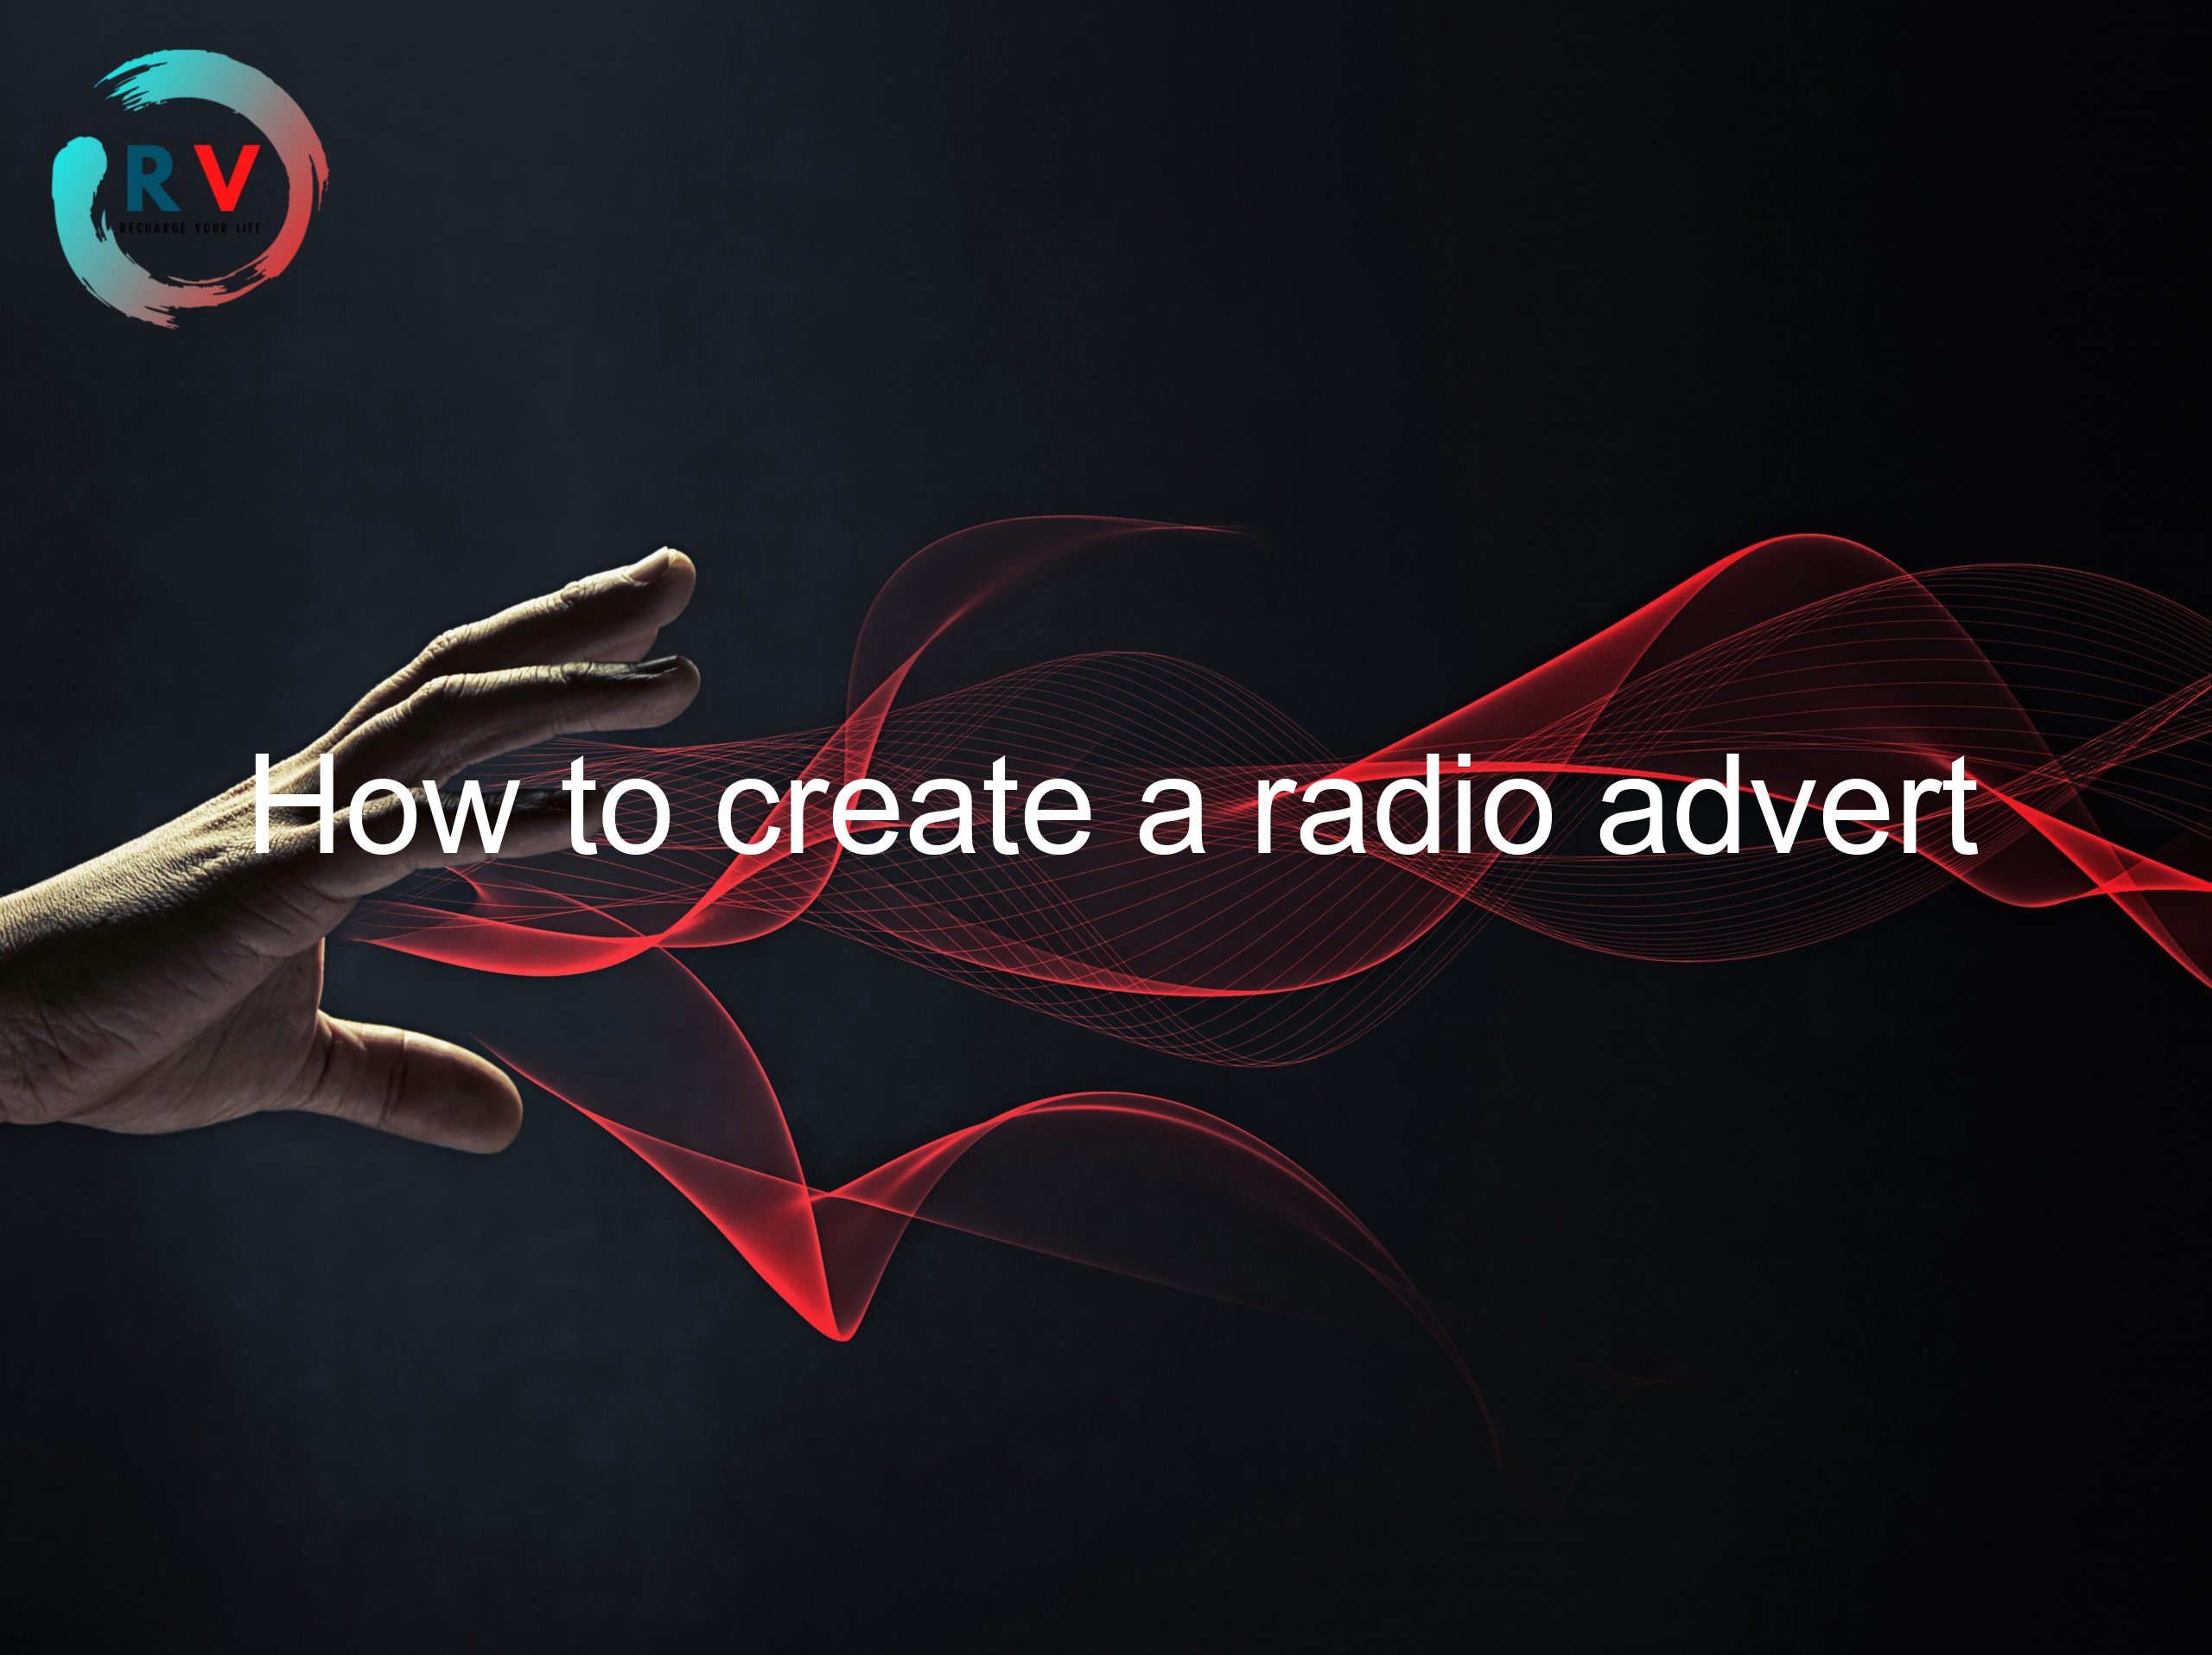 How to create a radio advert